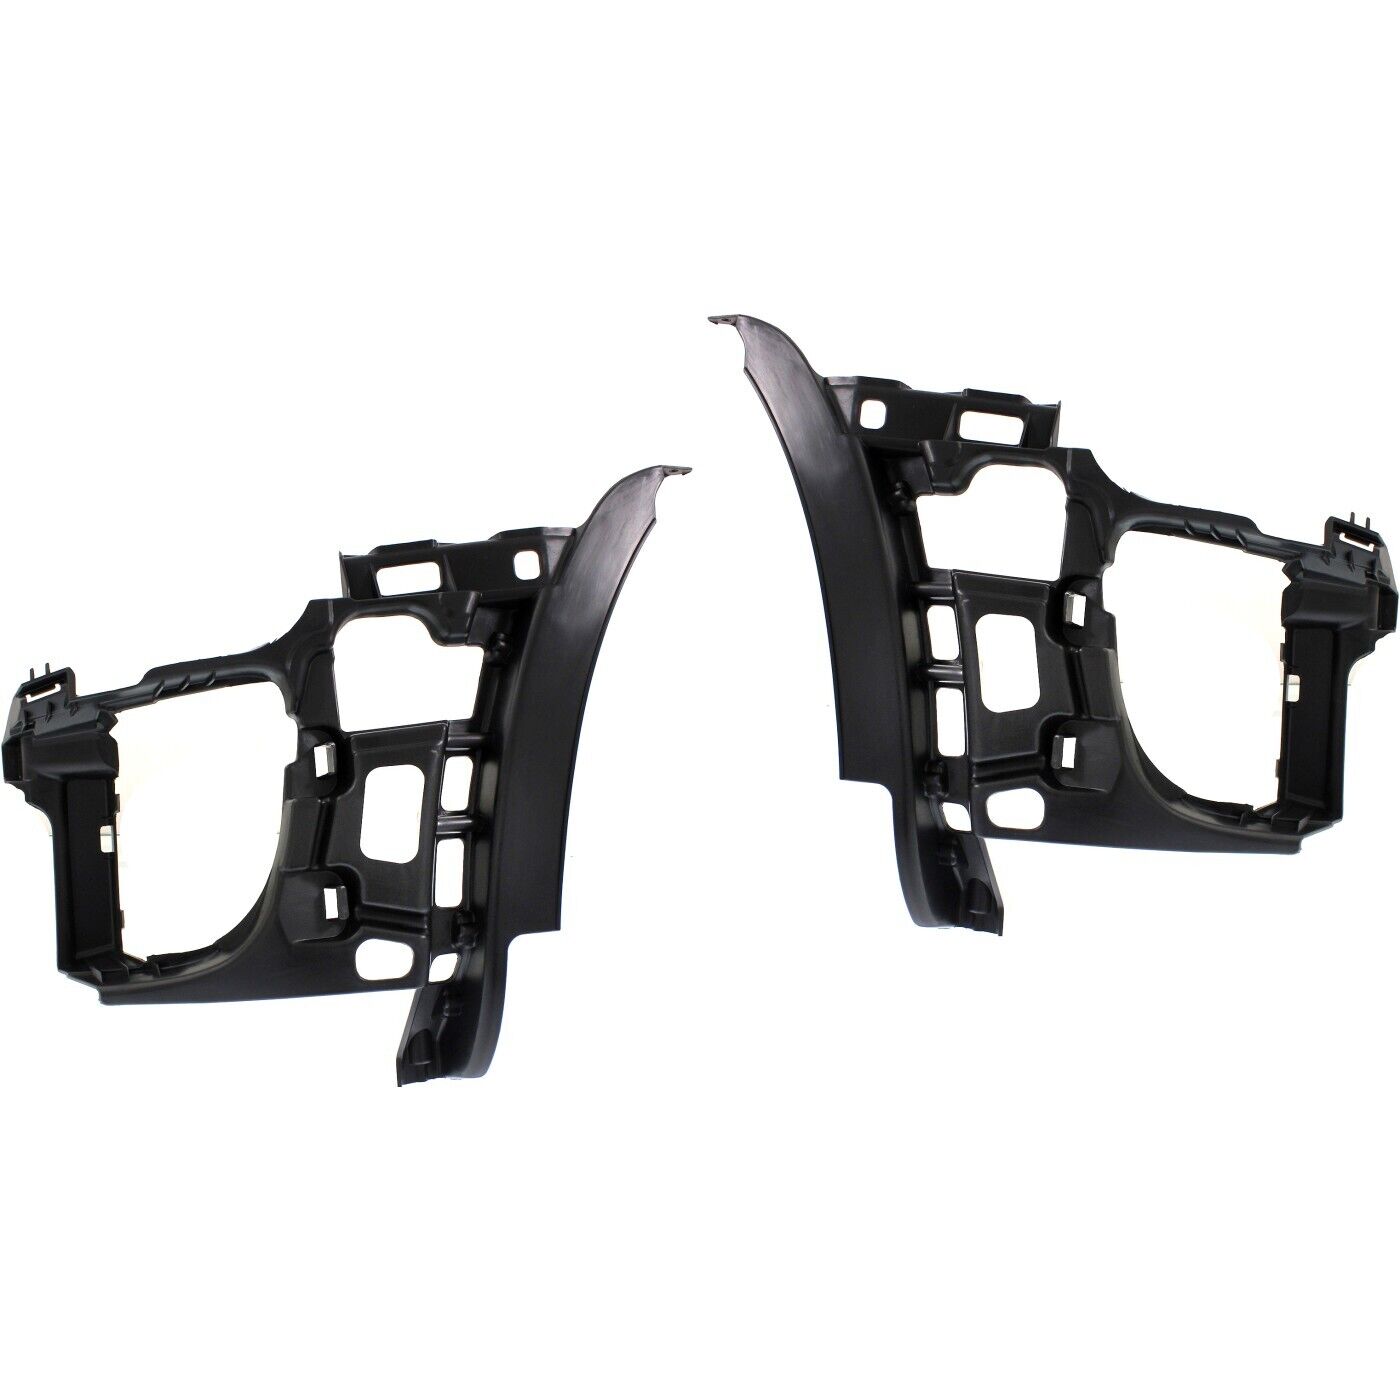 Bumper Bracket Set For 2010-14 Volkswagen GTI Suppot Cover Front Left and Right